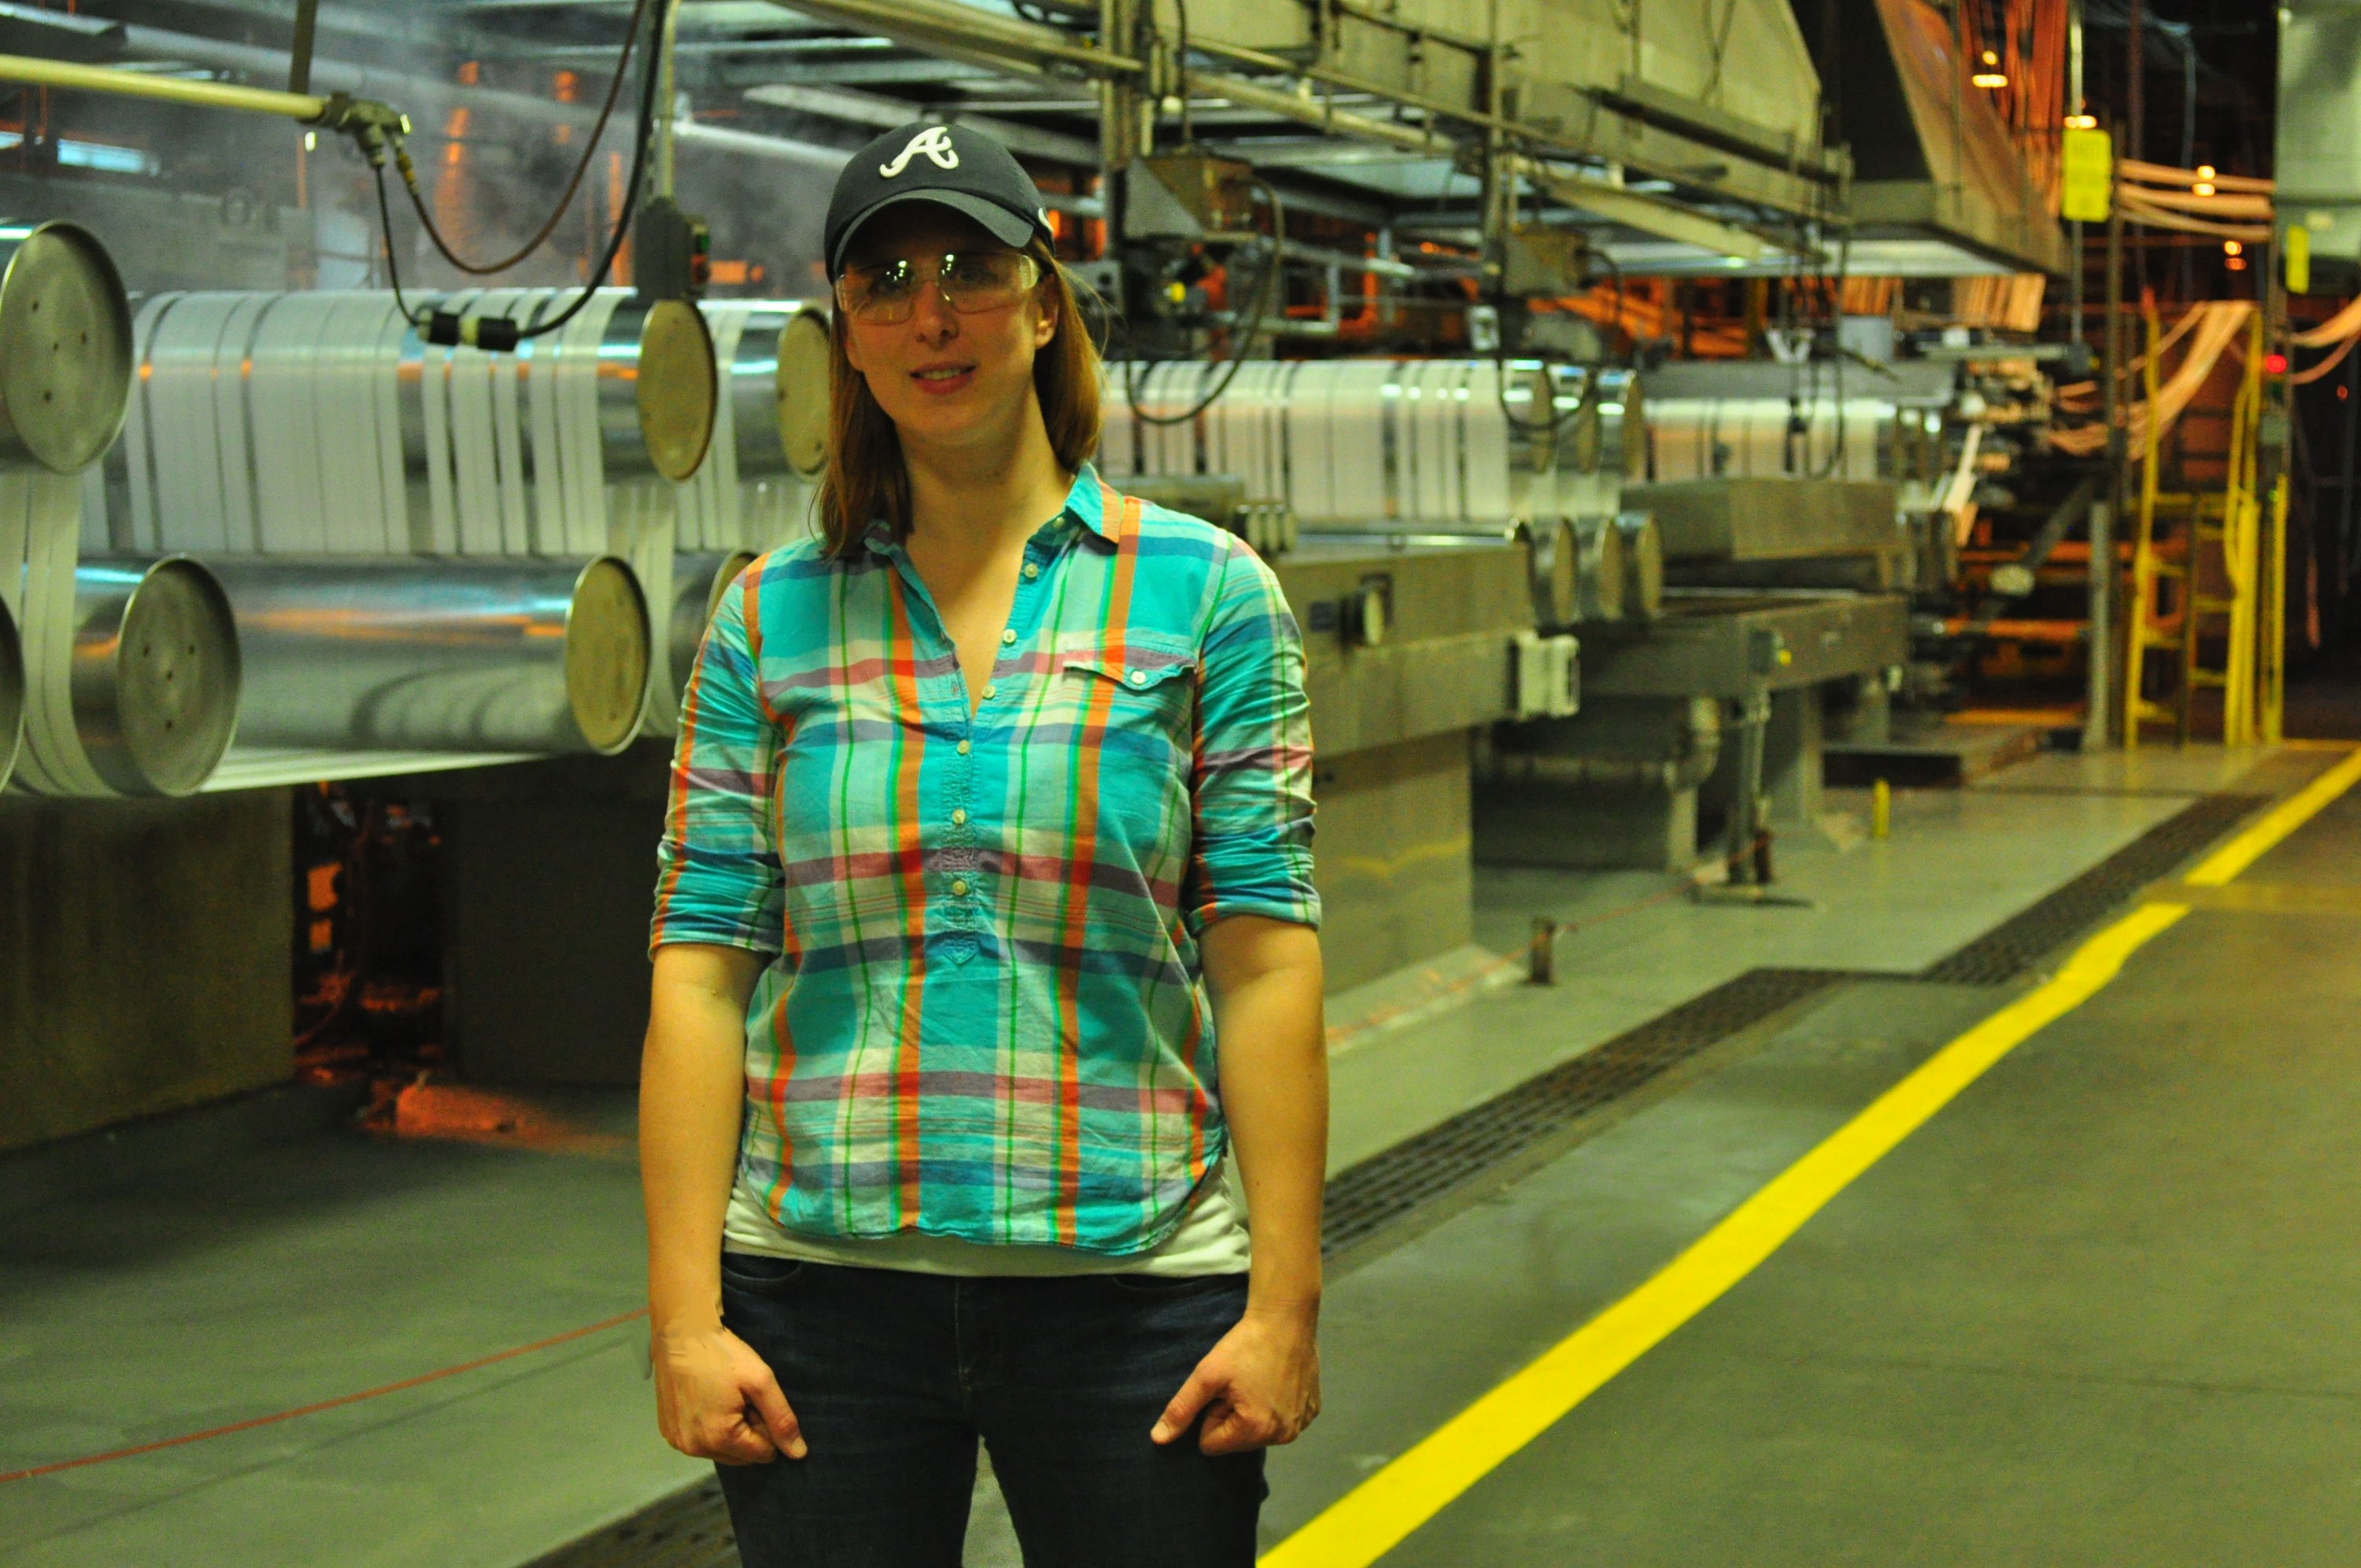 Sarah Daly, a 2016 Faces of Manufacturing awardee, is plant manager of FiberVisions in Covington, Georgia. Daly, who obtained her degree in engineering, says she's always enjoyed taking things apart to see how she could make them better. (Photo credit: Katie Takacs)